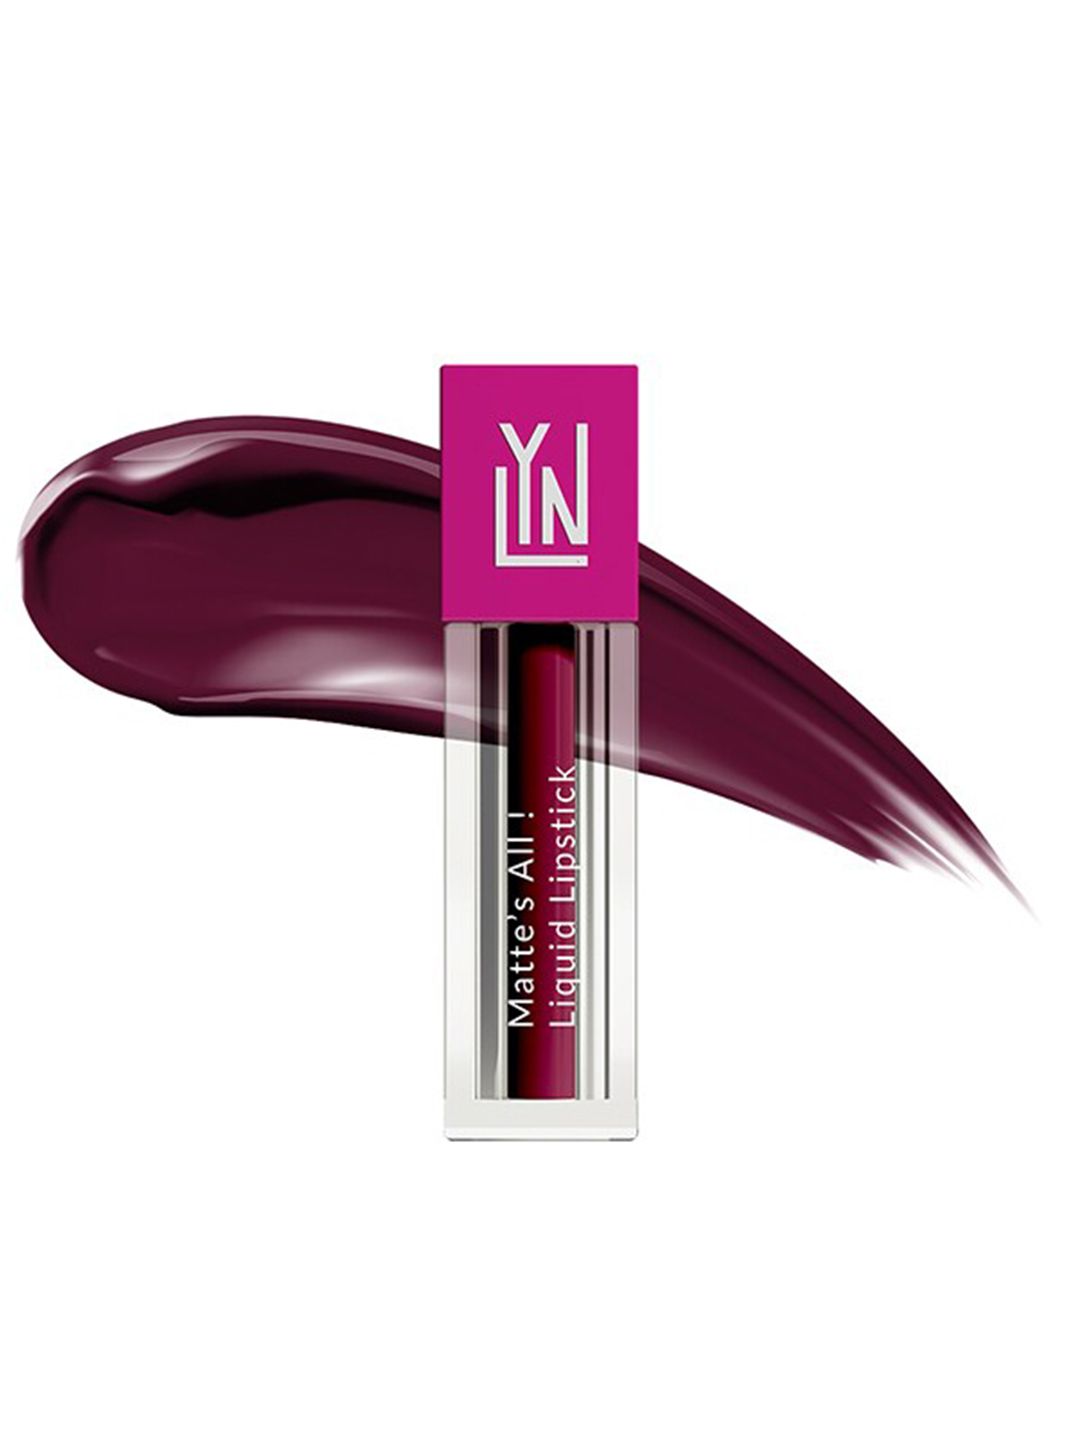 LYN LIVE YOUR NOW Matte Liquid Lipstick 1 ml -Berry Crush Price in India